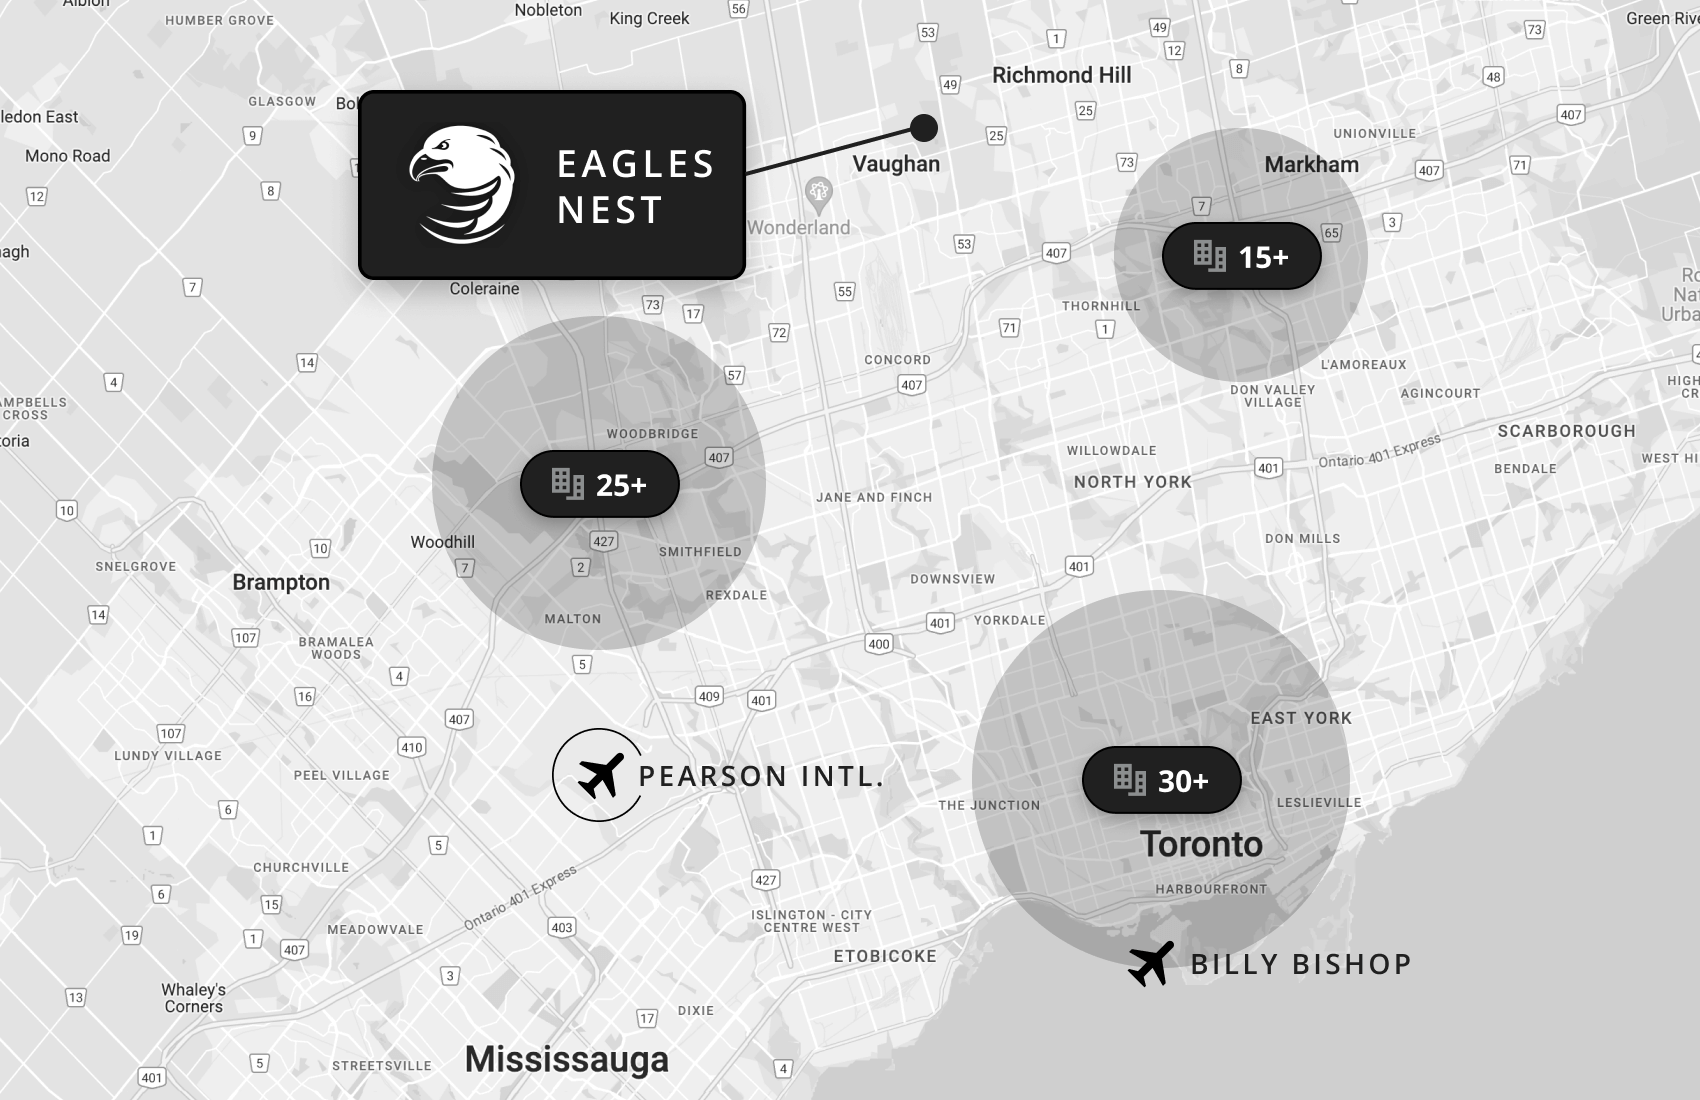 Eagles Nest in relation to the nearest airports, hotels and highways